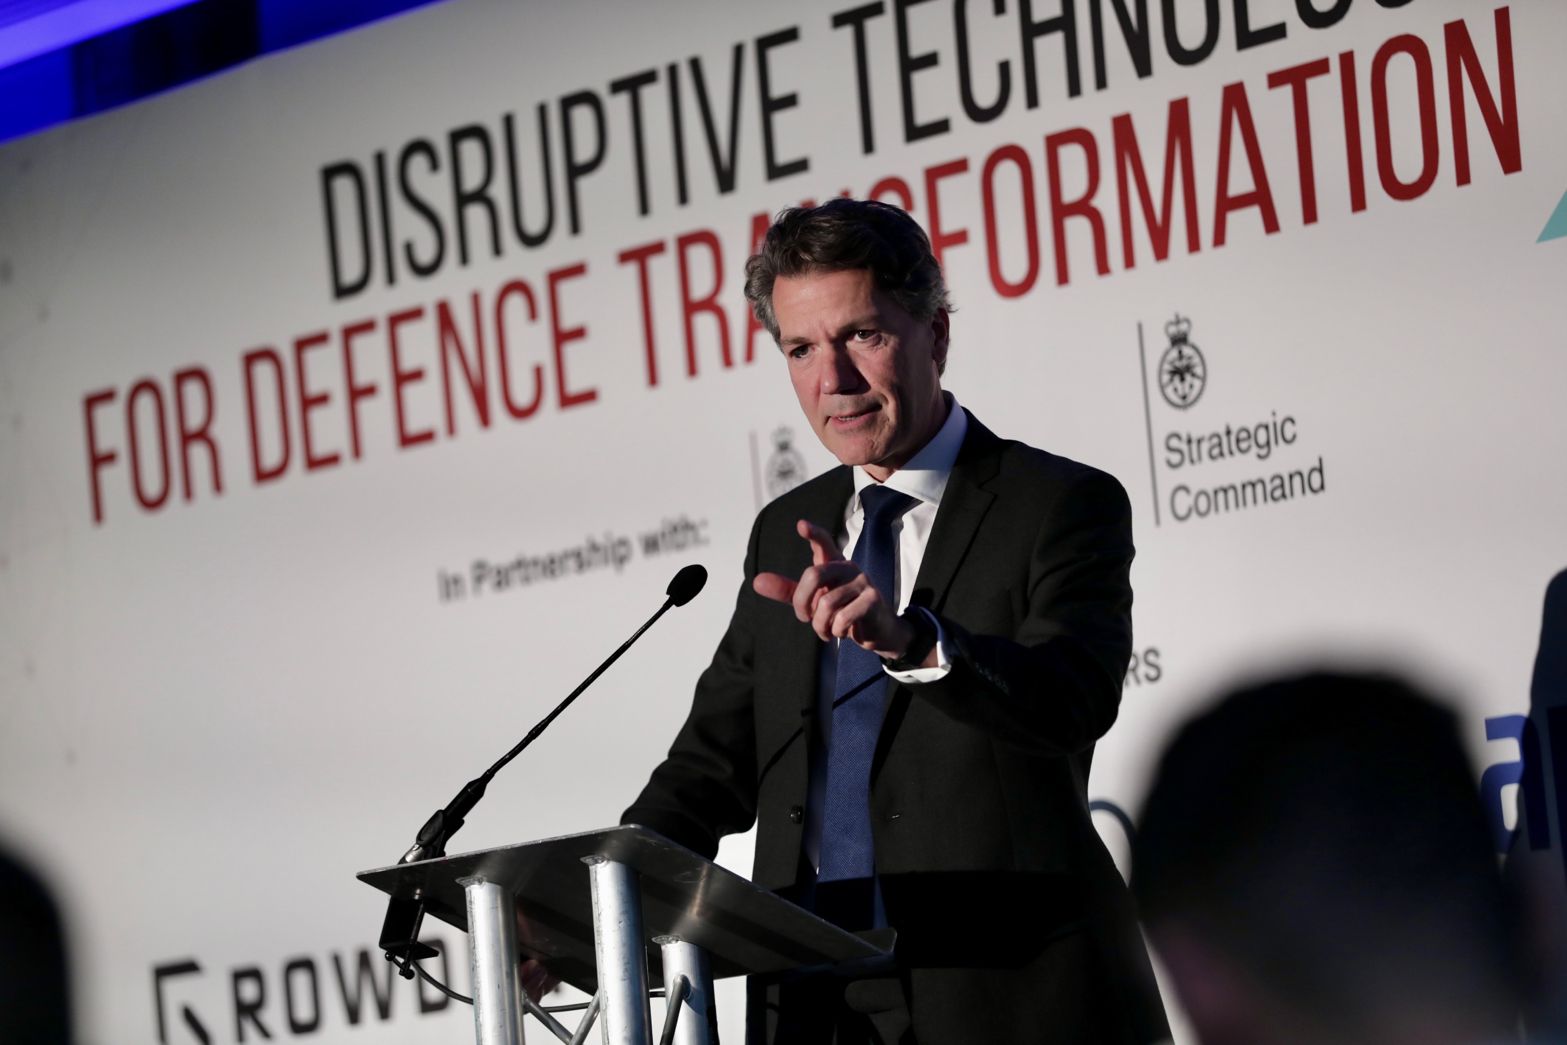 Second Permanent Secretary UK Ministry of Defence Laurence Lee delivered the opening keynote at Disruptive Technology for Defence Transformation 2022